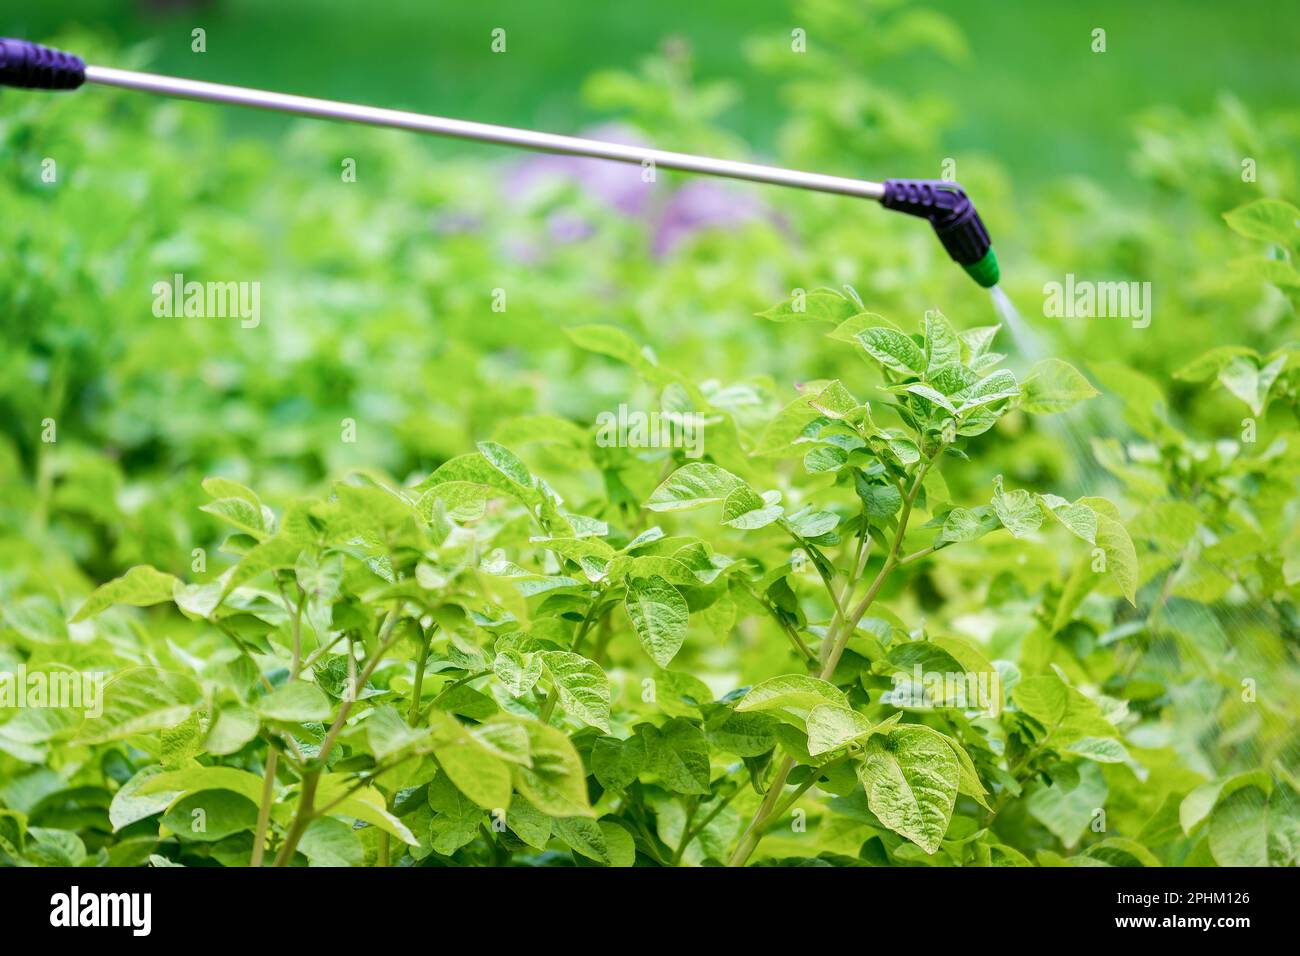 Potato field. Treatment of the plant against diseases with a sprayer. No phytophthora. Stock Photo